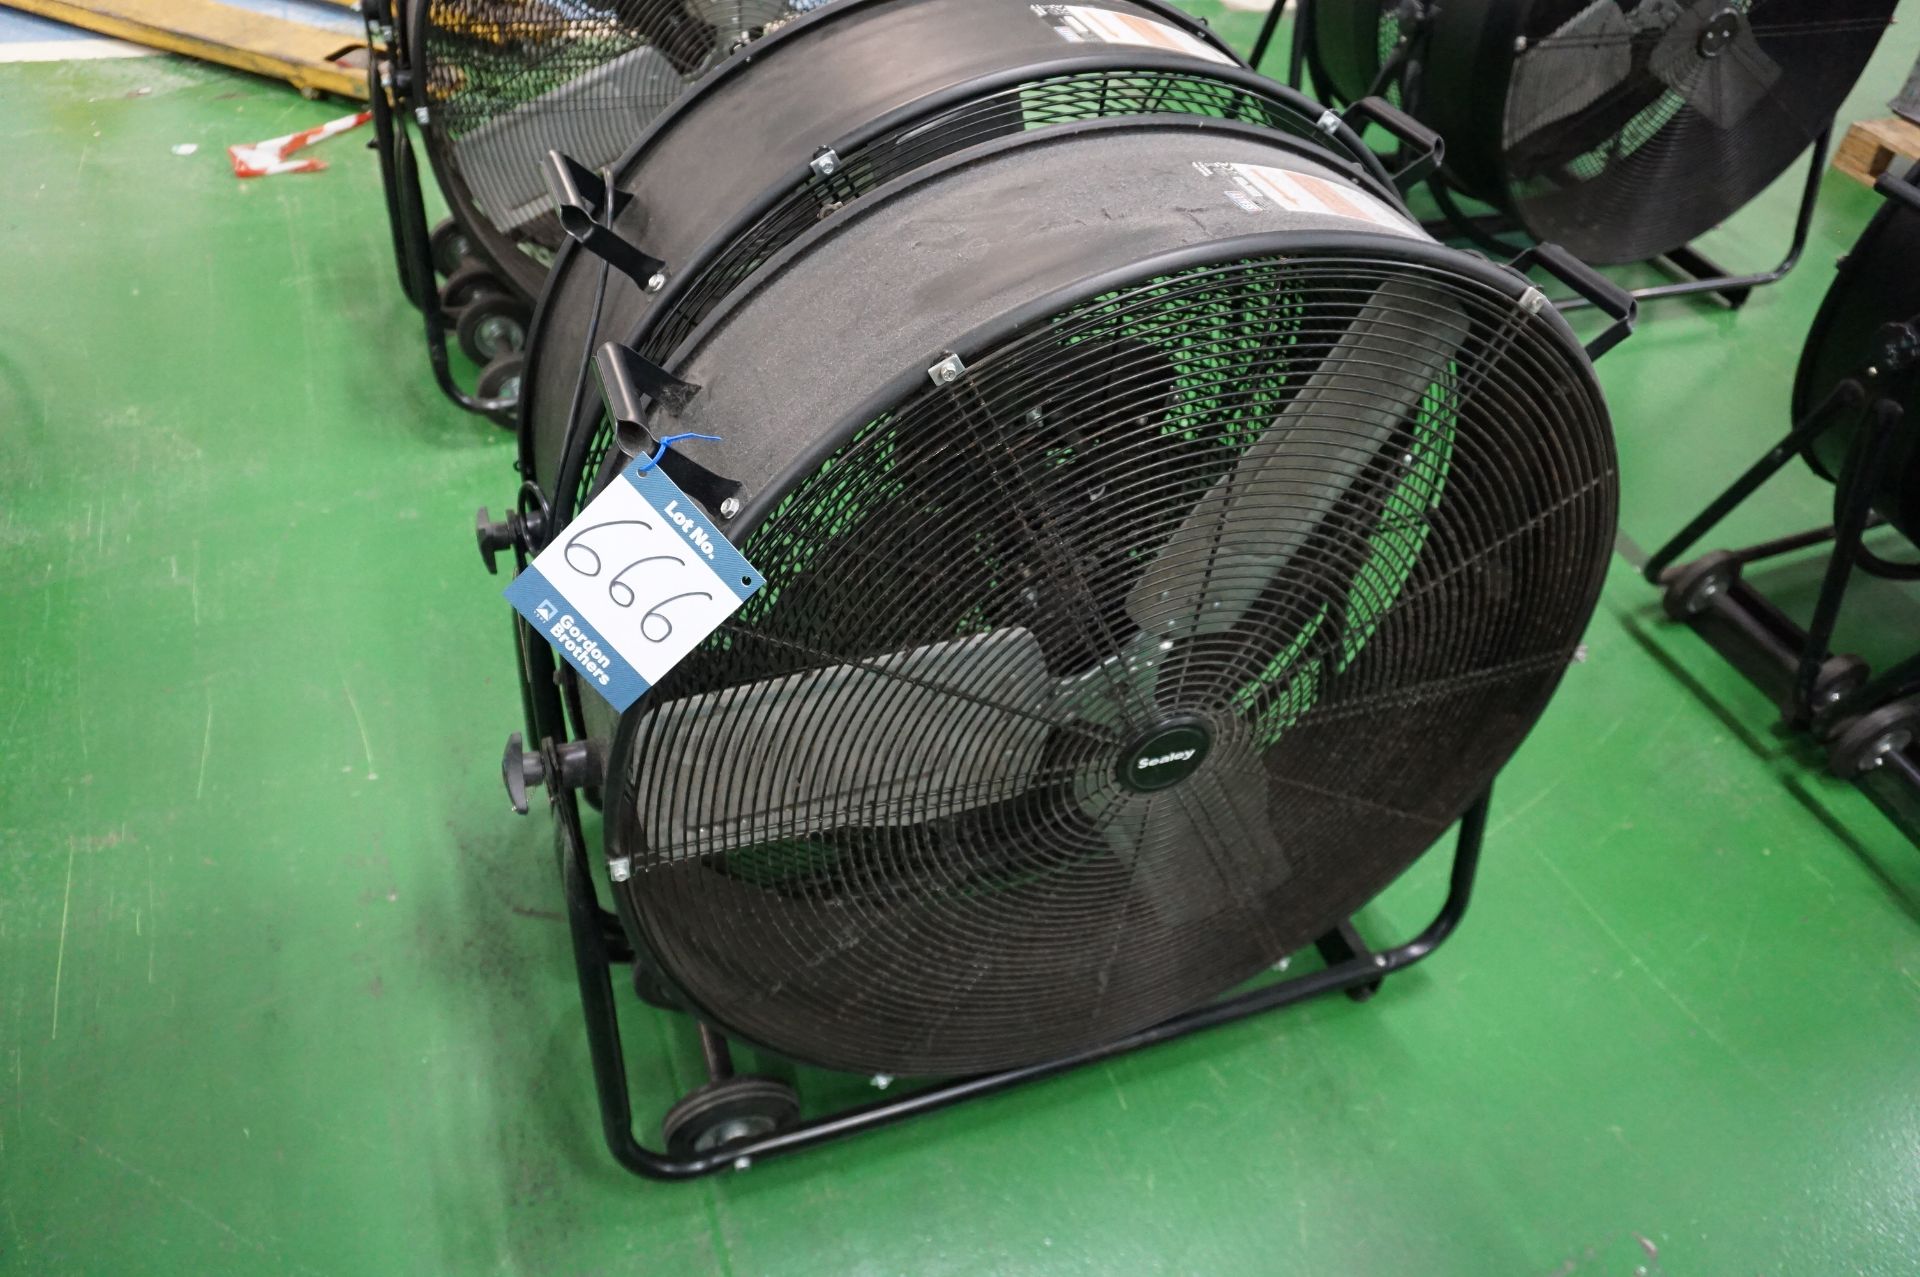 2 x Sealey HVD30v2 mobile dual speed industrial fans